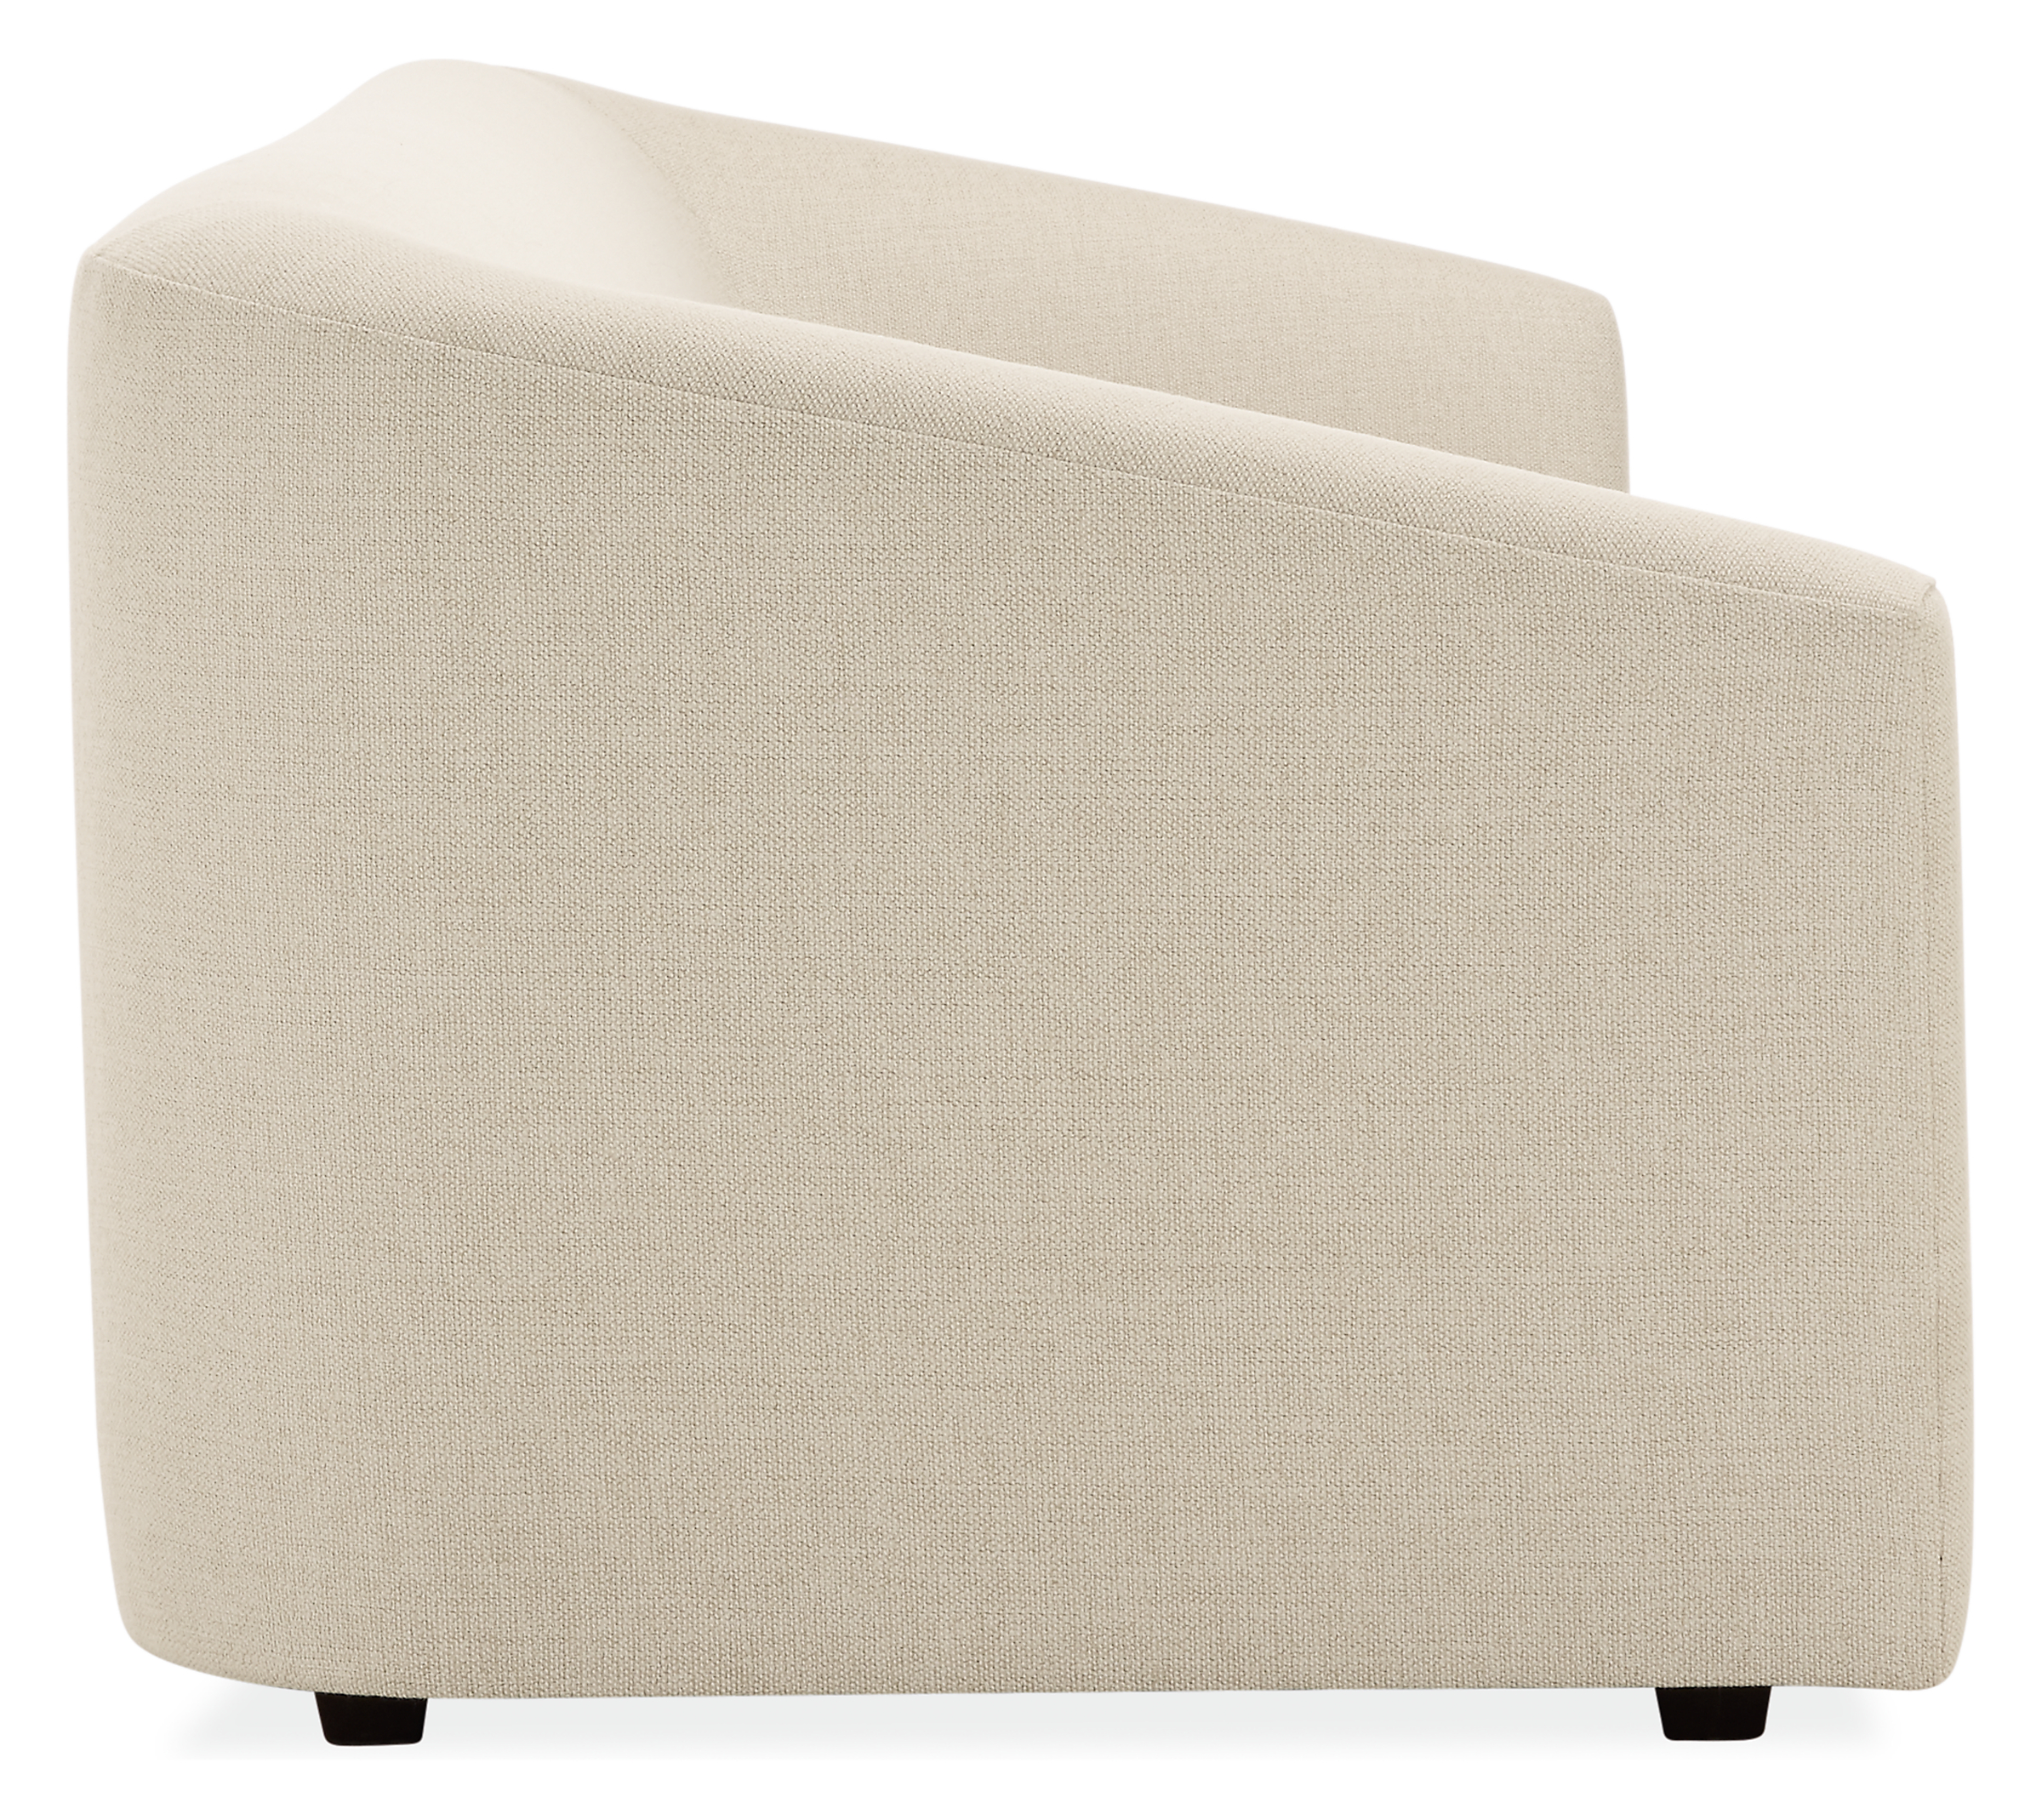 Side view of Ada 90 Sofa in Tepic Ivory.